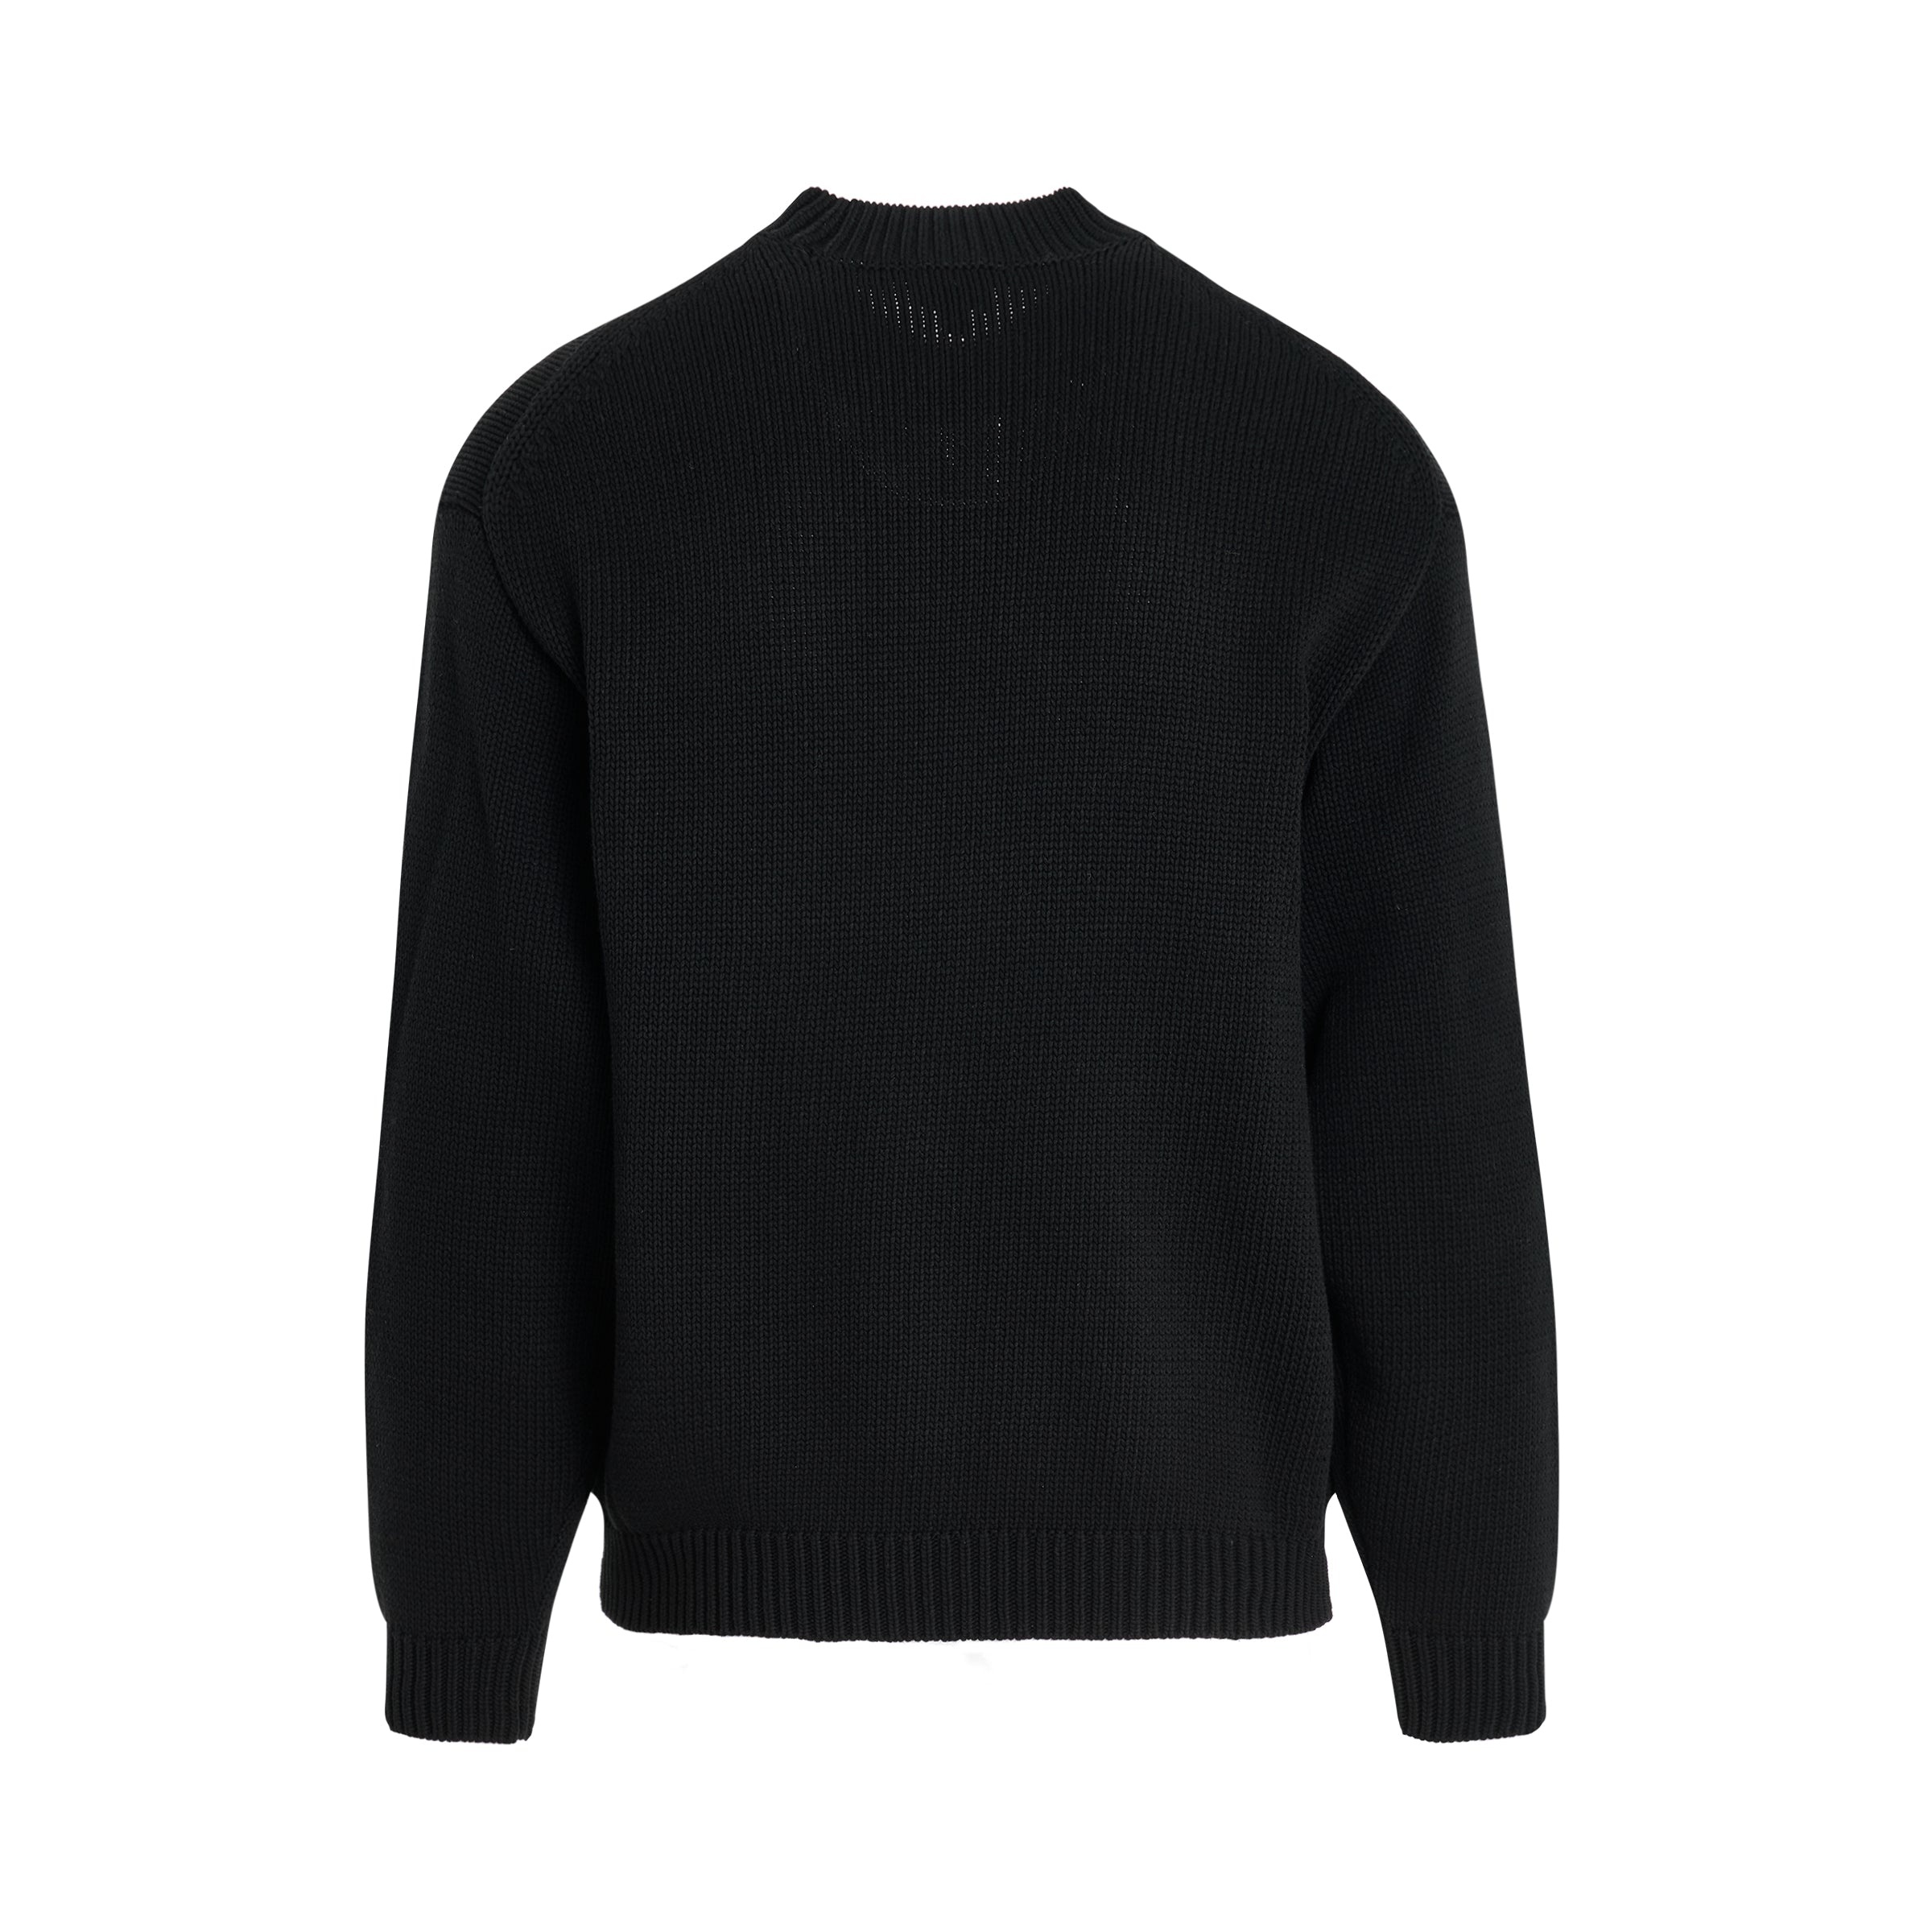 Kenzo Lucky Tiger Knit Sweater in Black - 4